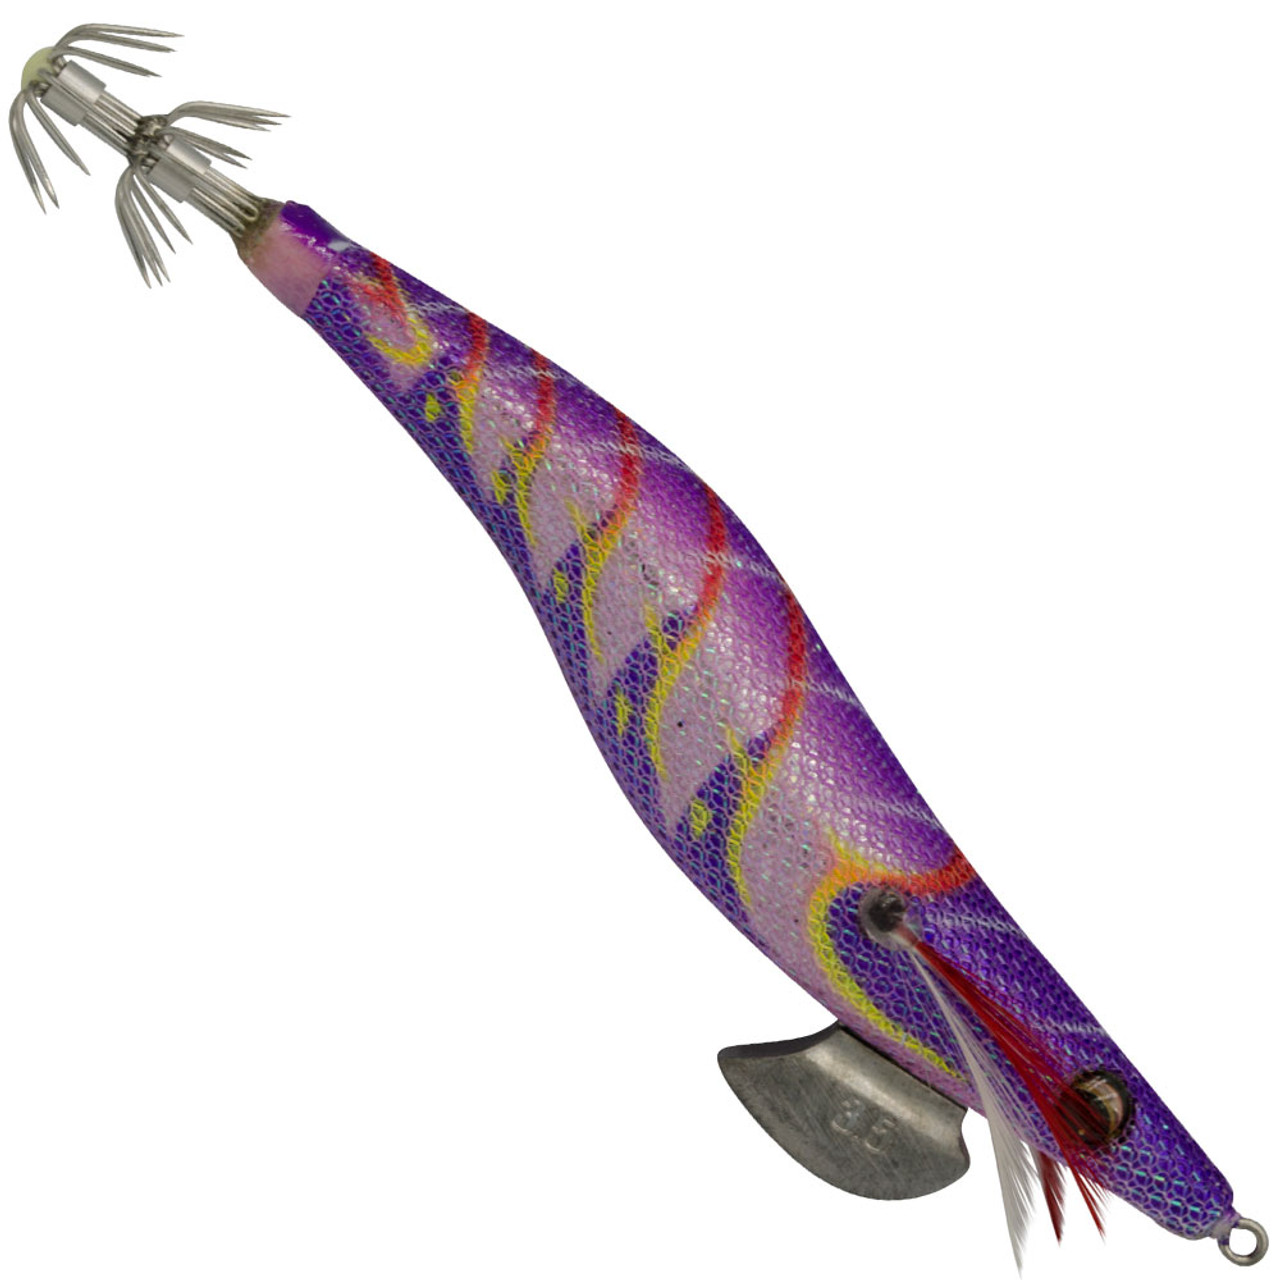  Cheap Cheap Owner Cultiva Draw 4 Squid Jigs at  unbeatable price